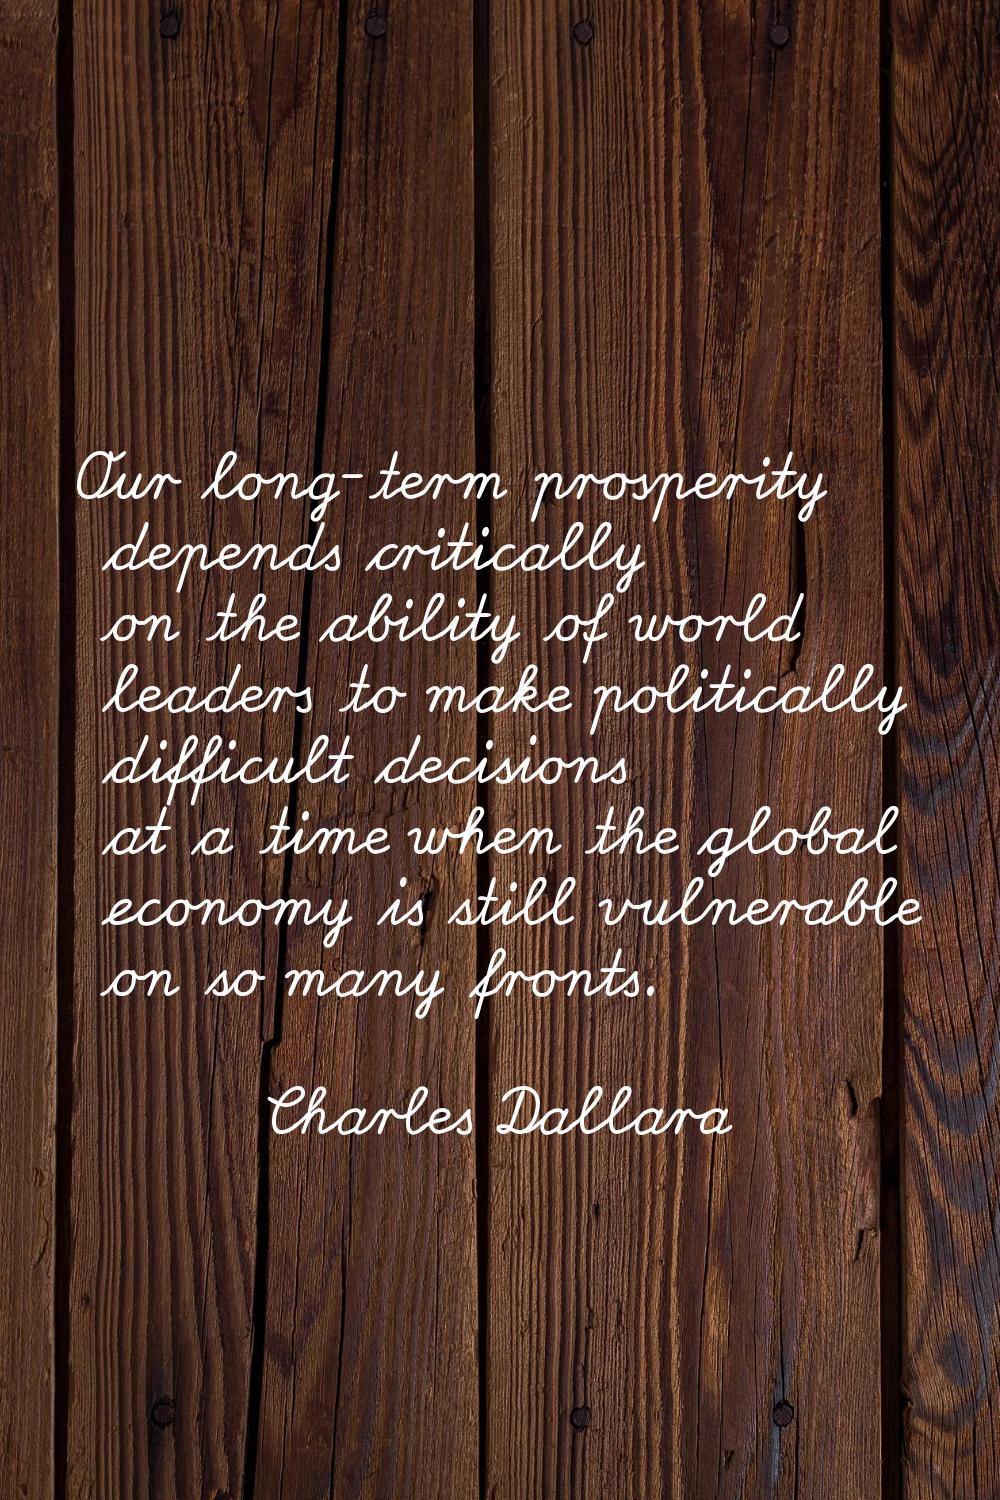 Our long-term prosperity depends critically on the ability of world leaders to make politically dif